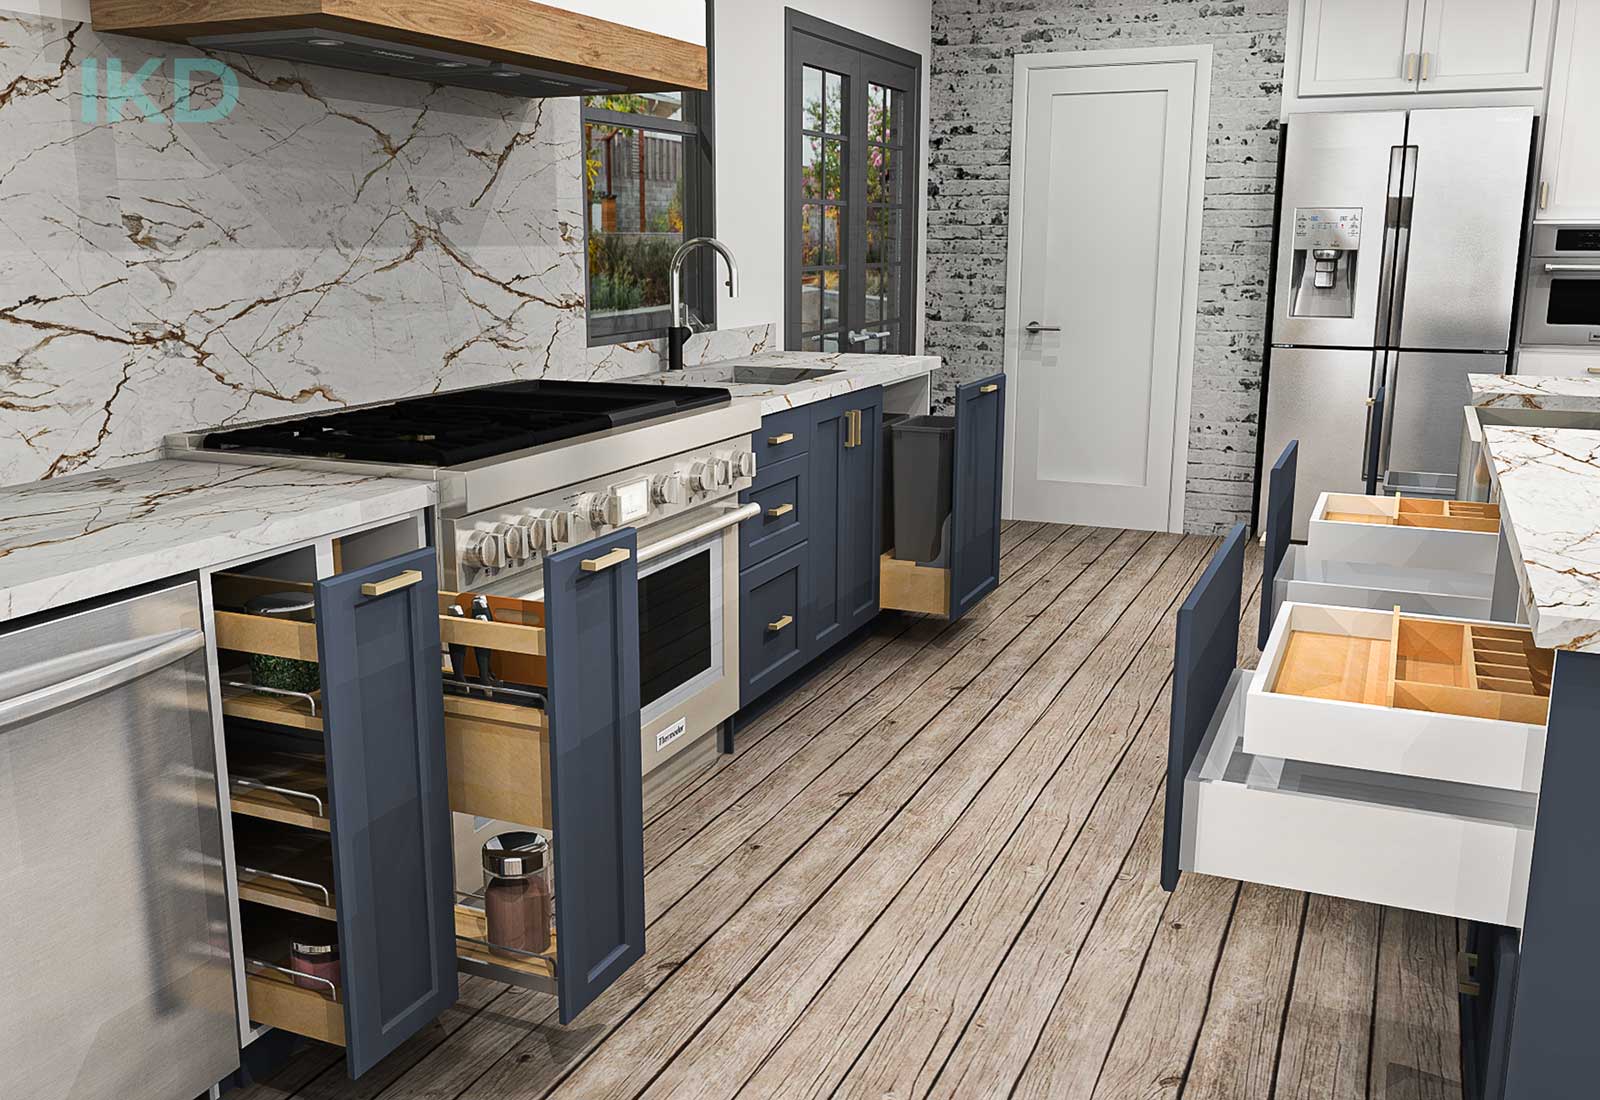 IKEA blue kitchen cabinets open to show different Rev-A-Shelf organizer options